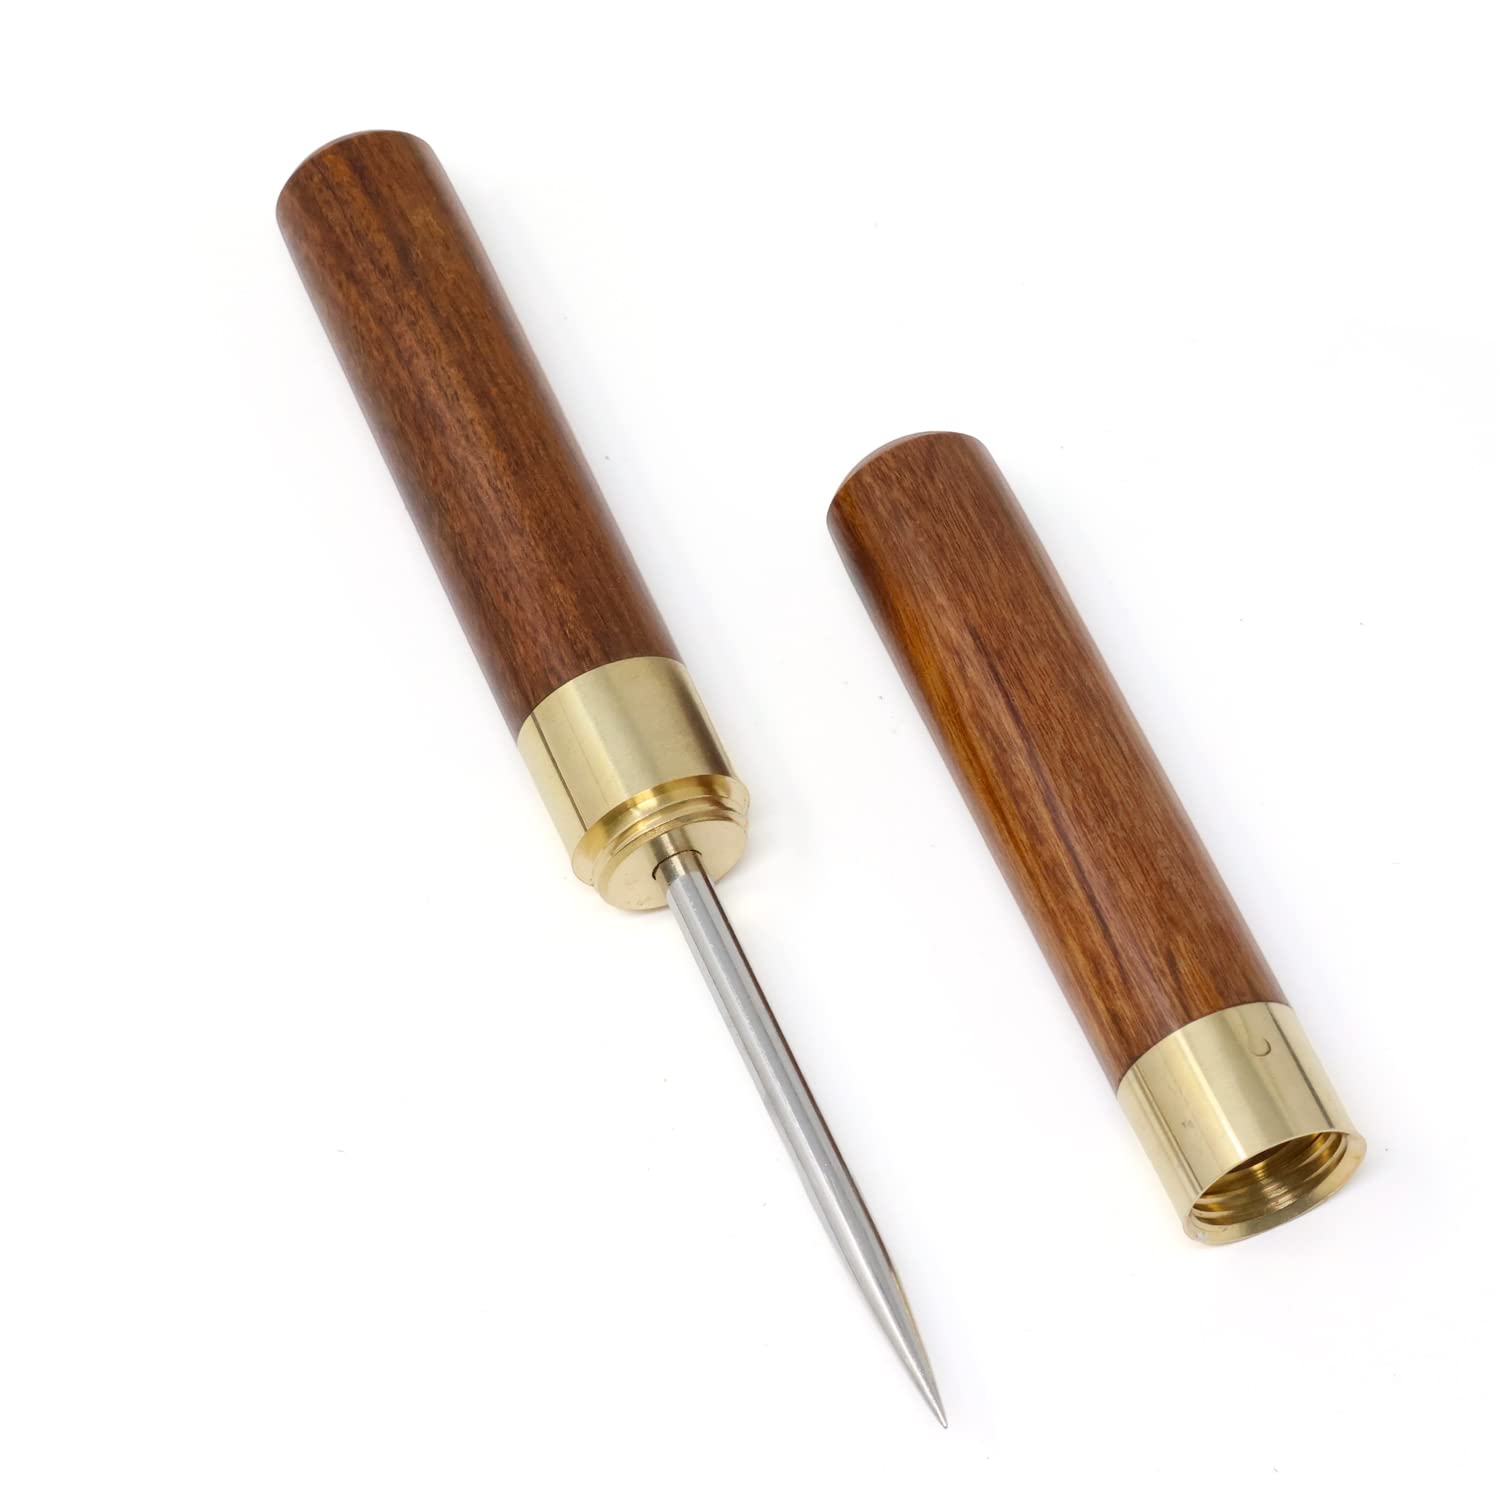 yueton Portable Stainless Steel Ice Pick with Wooden Handle and Sheath Safety Cover, for Bars Restaurants Home Camping